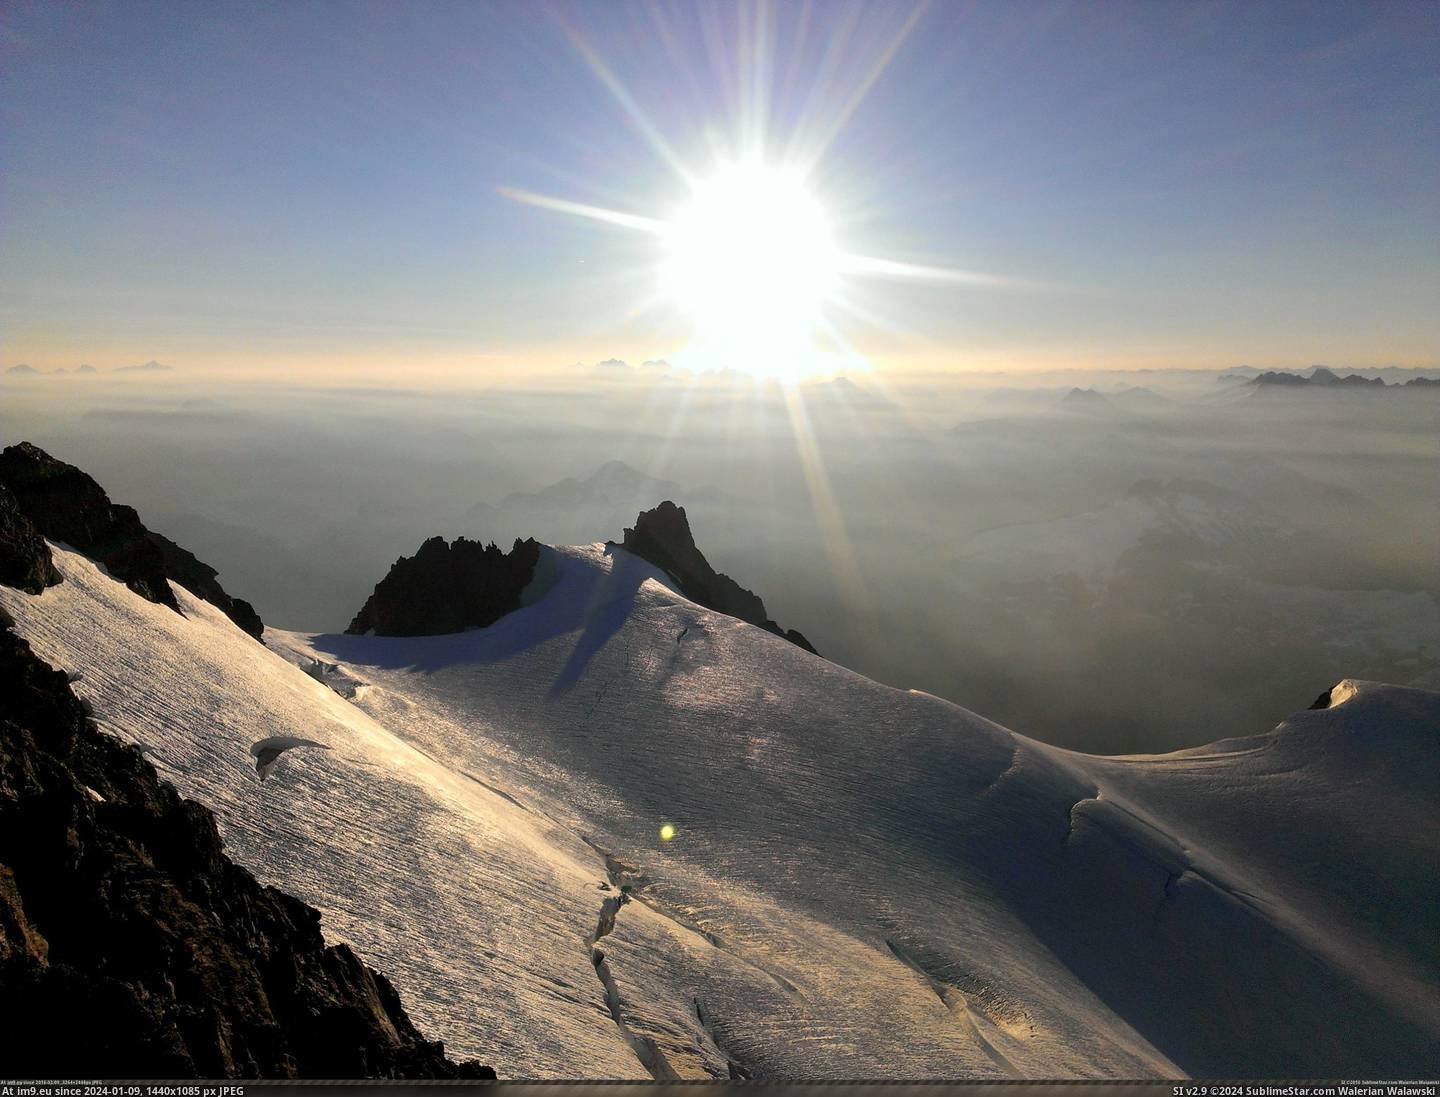 #3264x2448  #Summit [Earthporn] View from Mt. Shuksan summit block, July 2015 [3264x2448] Pic. (Image of album My r/EARTHPORN favs))